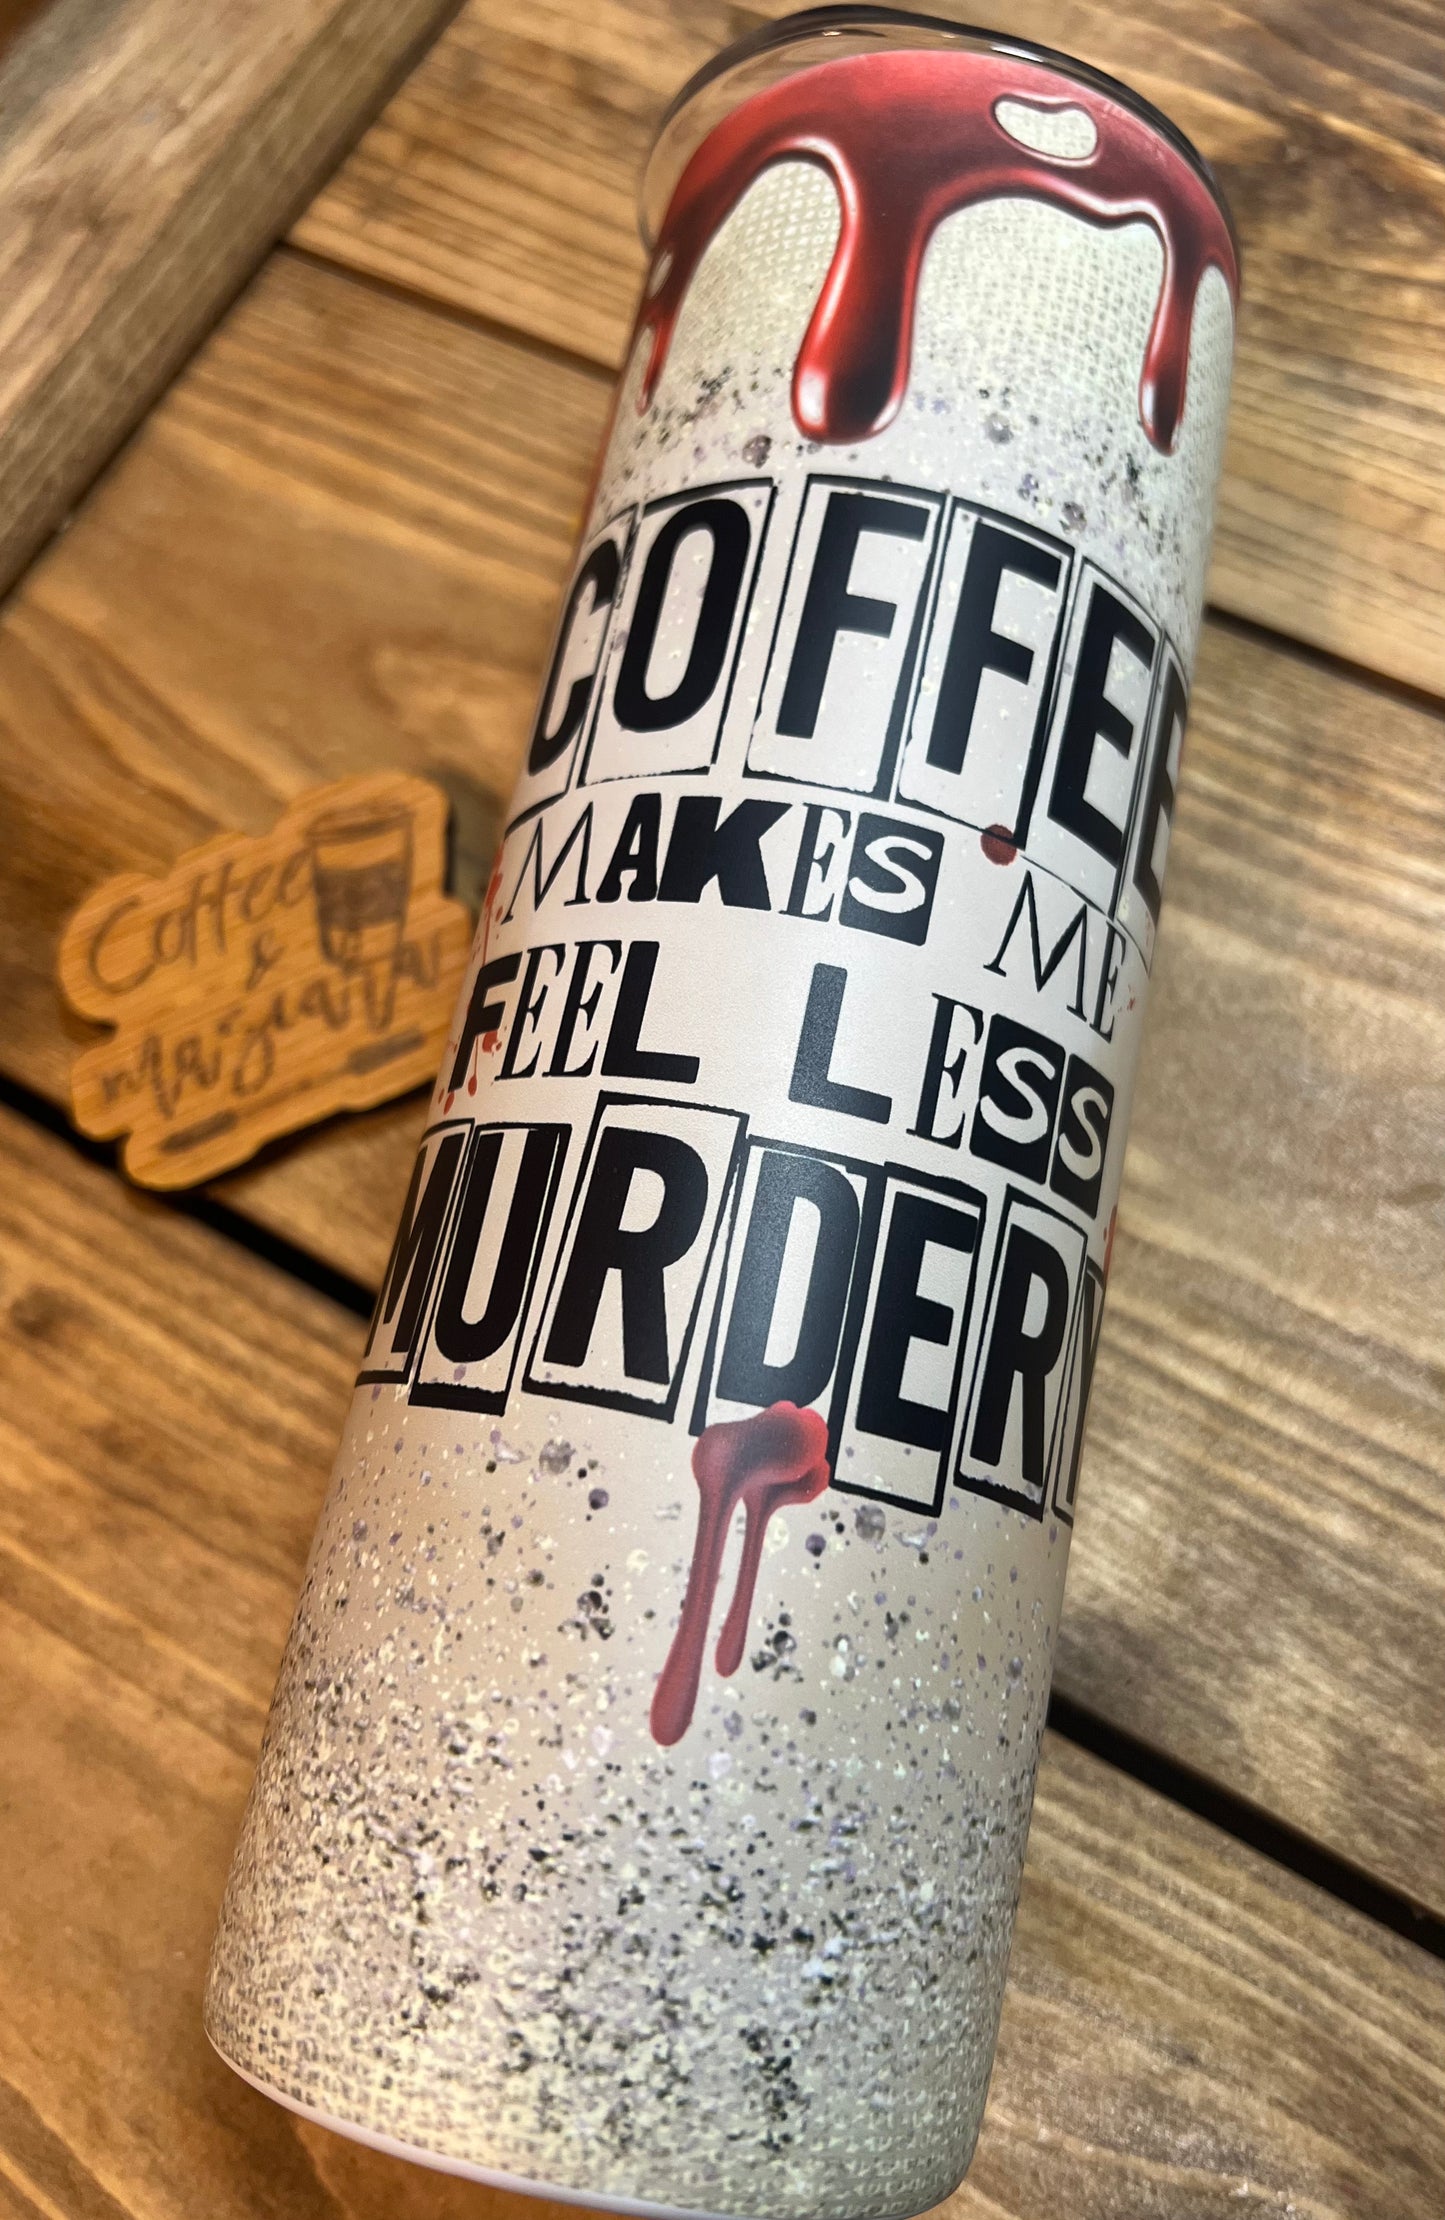 Coffee makes me less murdery